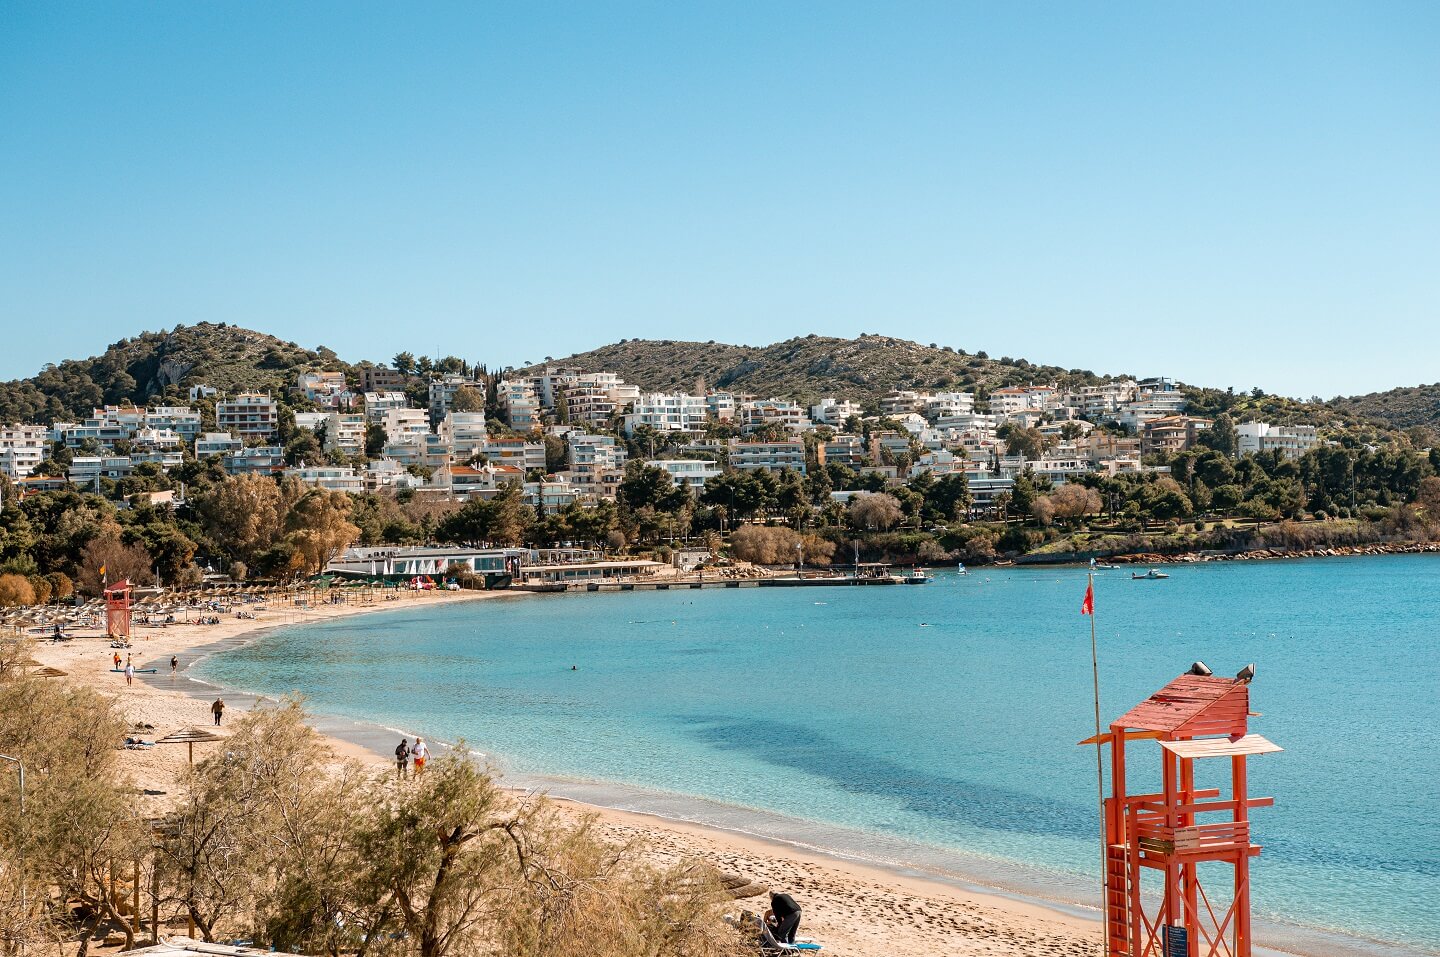 How to Spend a Day in Vouliagmeni, Greece